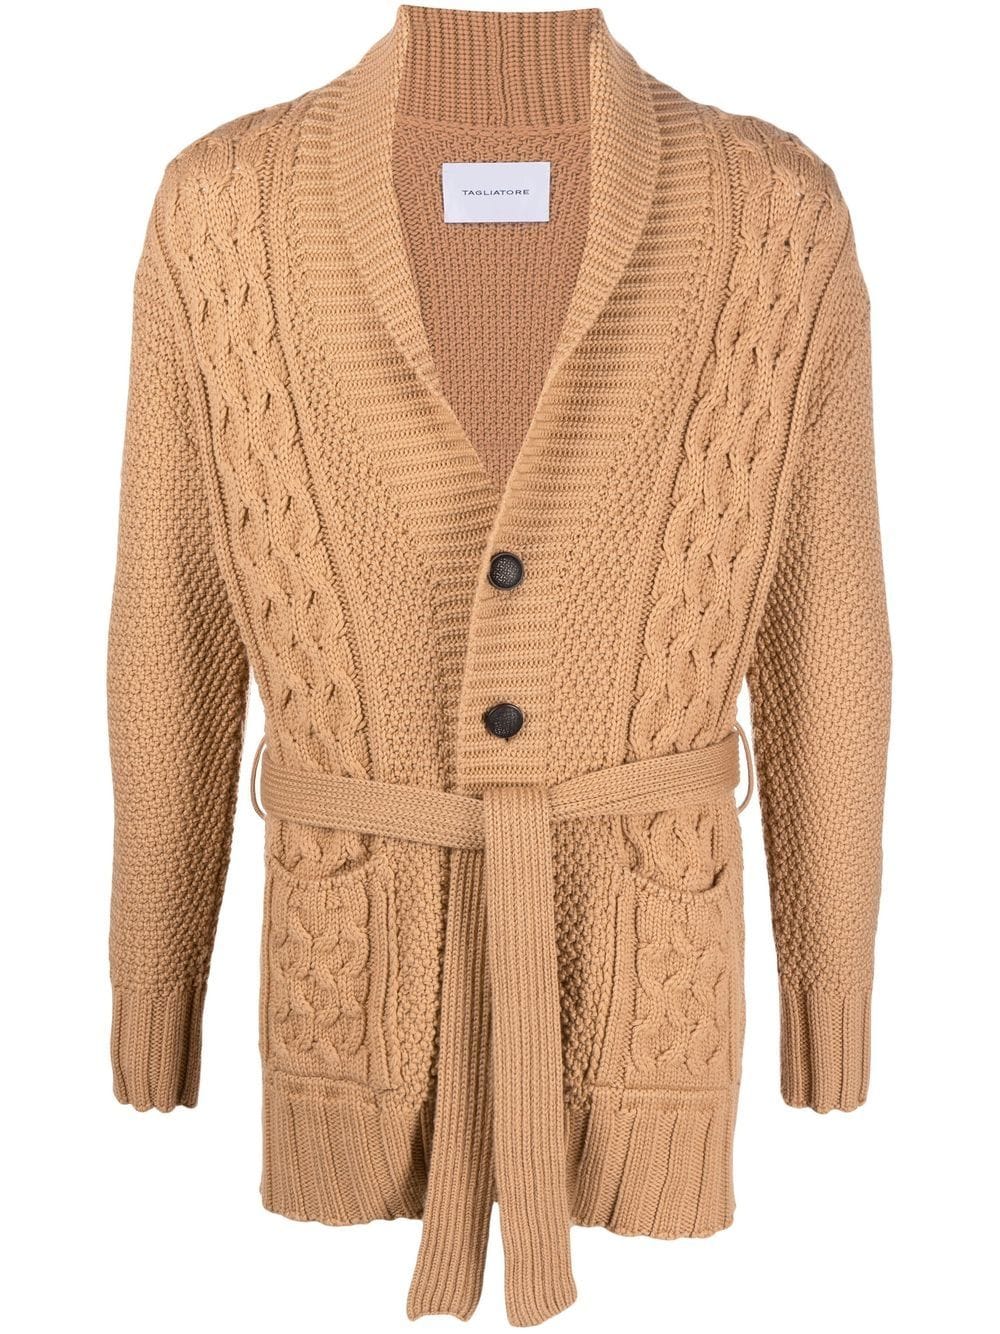 Tagliatore cable-knit belted cardigan - Neutrals